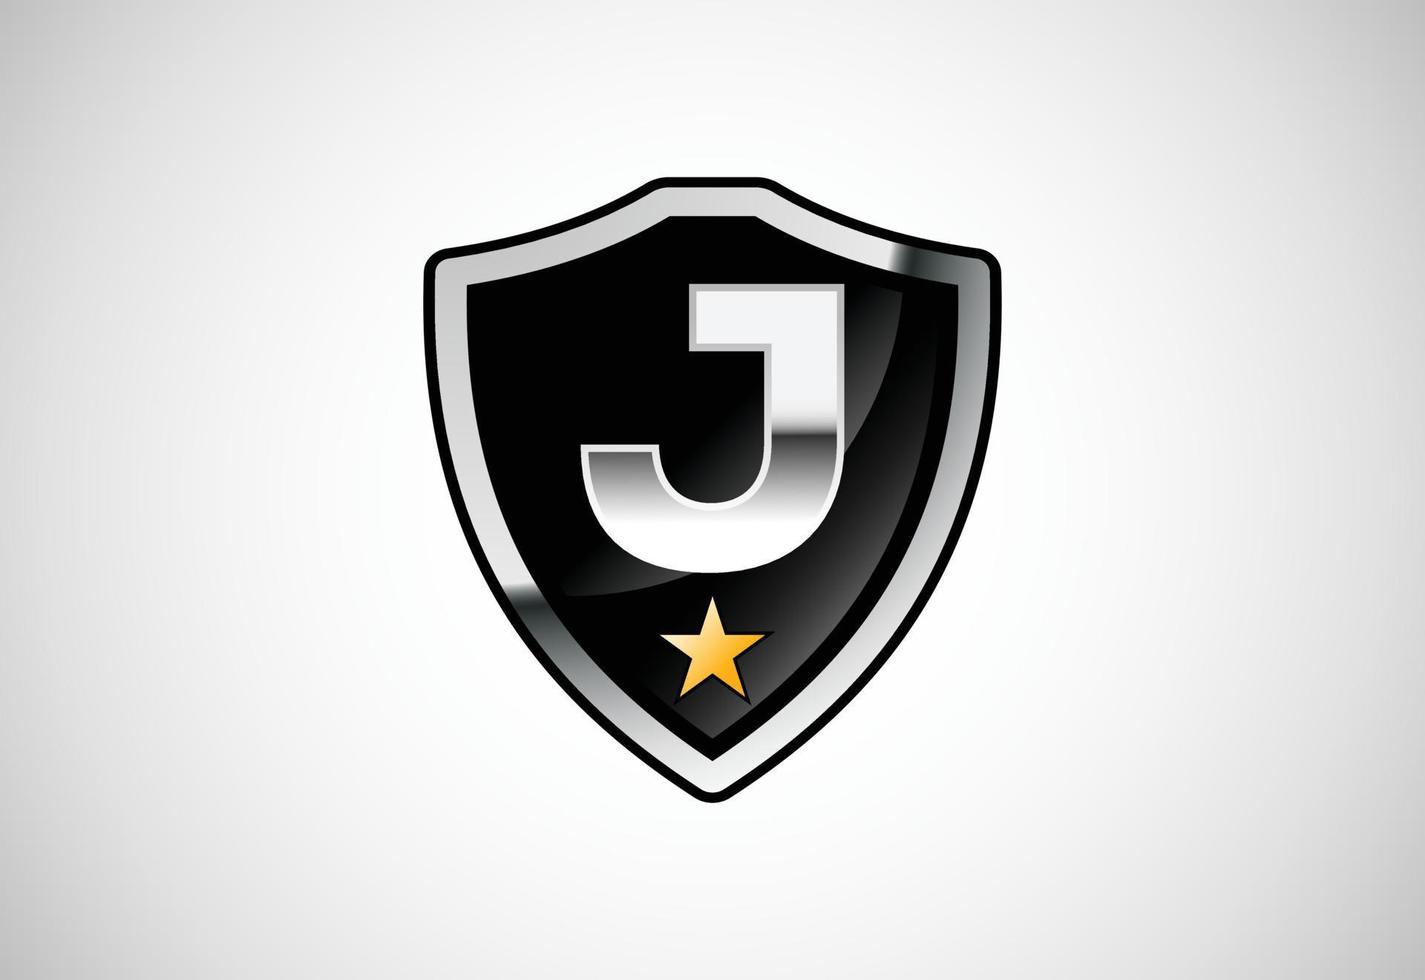 Initial letter J with shield icon logo design vector illustration. Shield with monogram alphabet